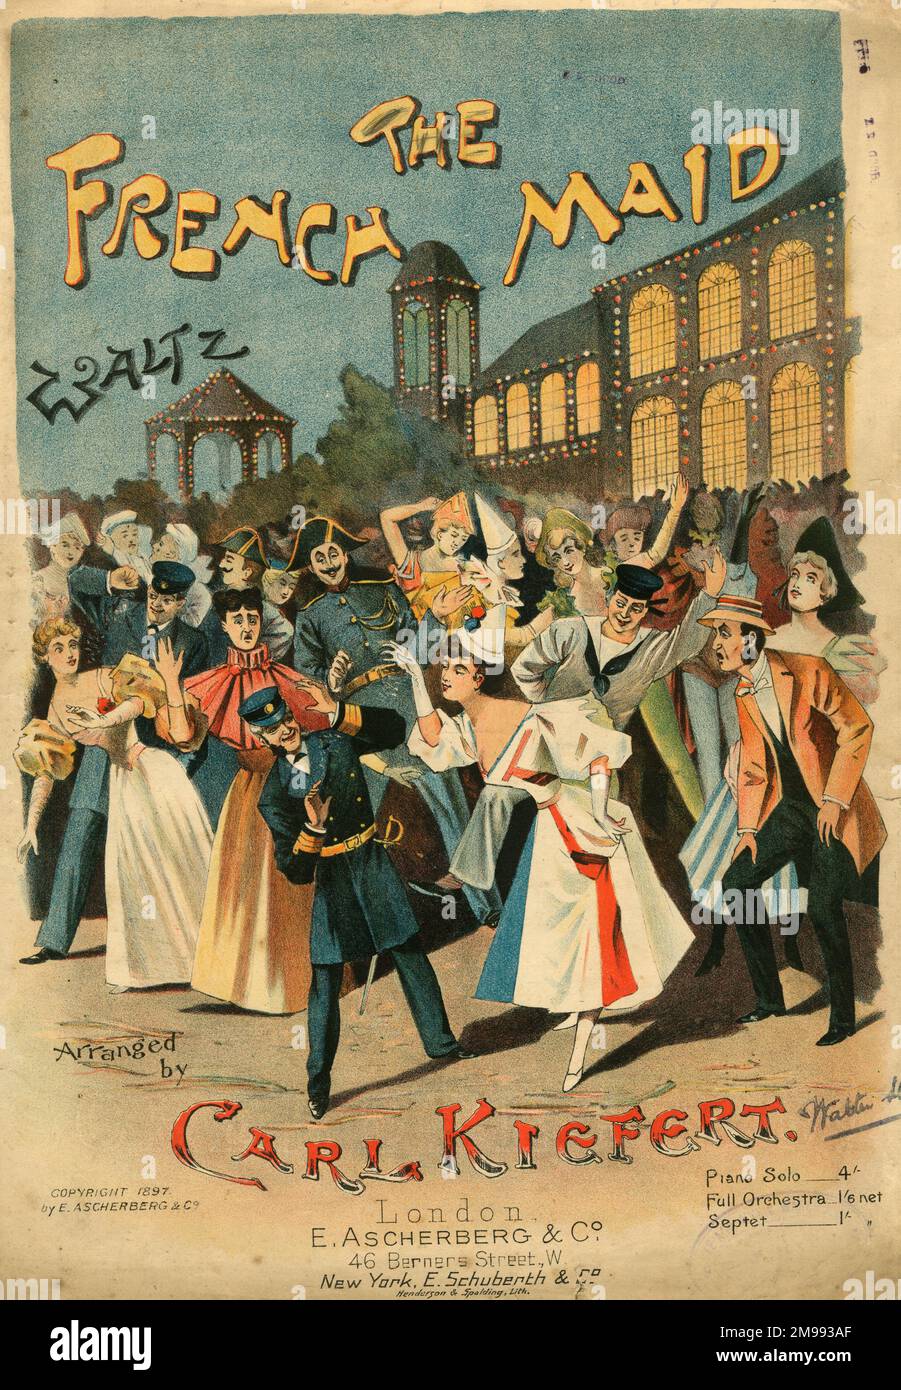 Music cover, The French Maid Waltz, arranged by Carl Kiefert, depicting a fancy dress party. Stock Photo